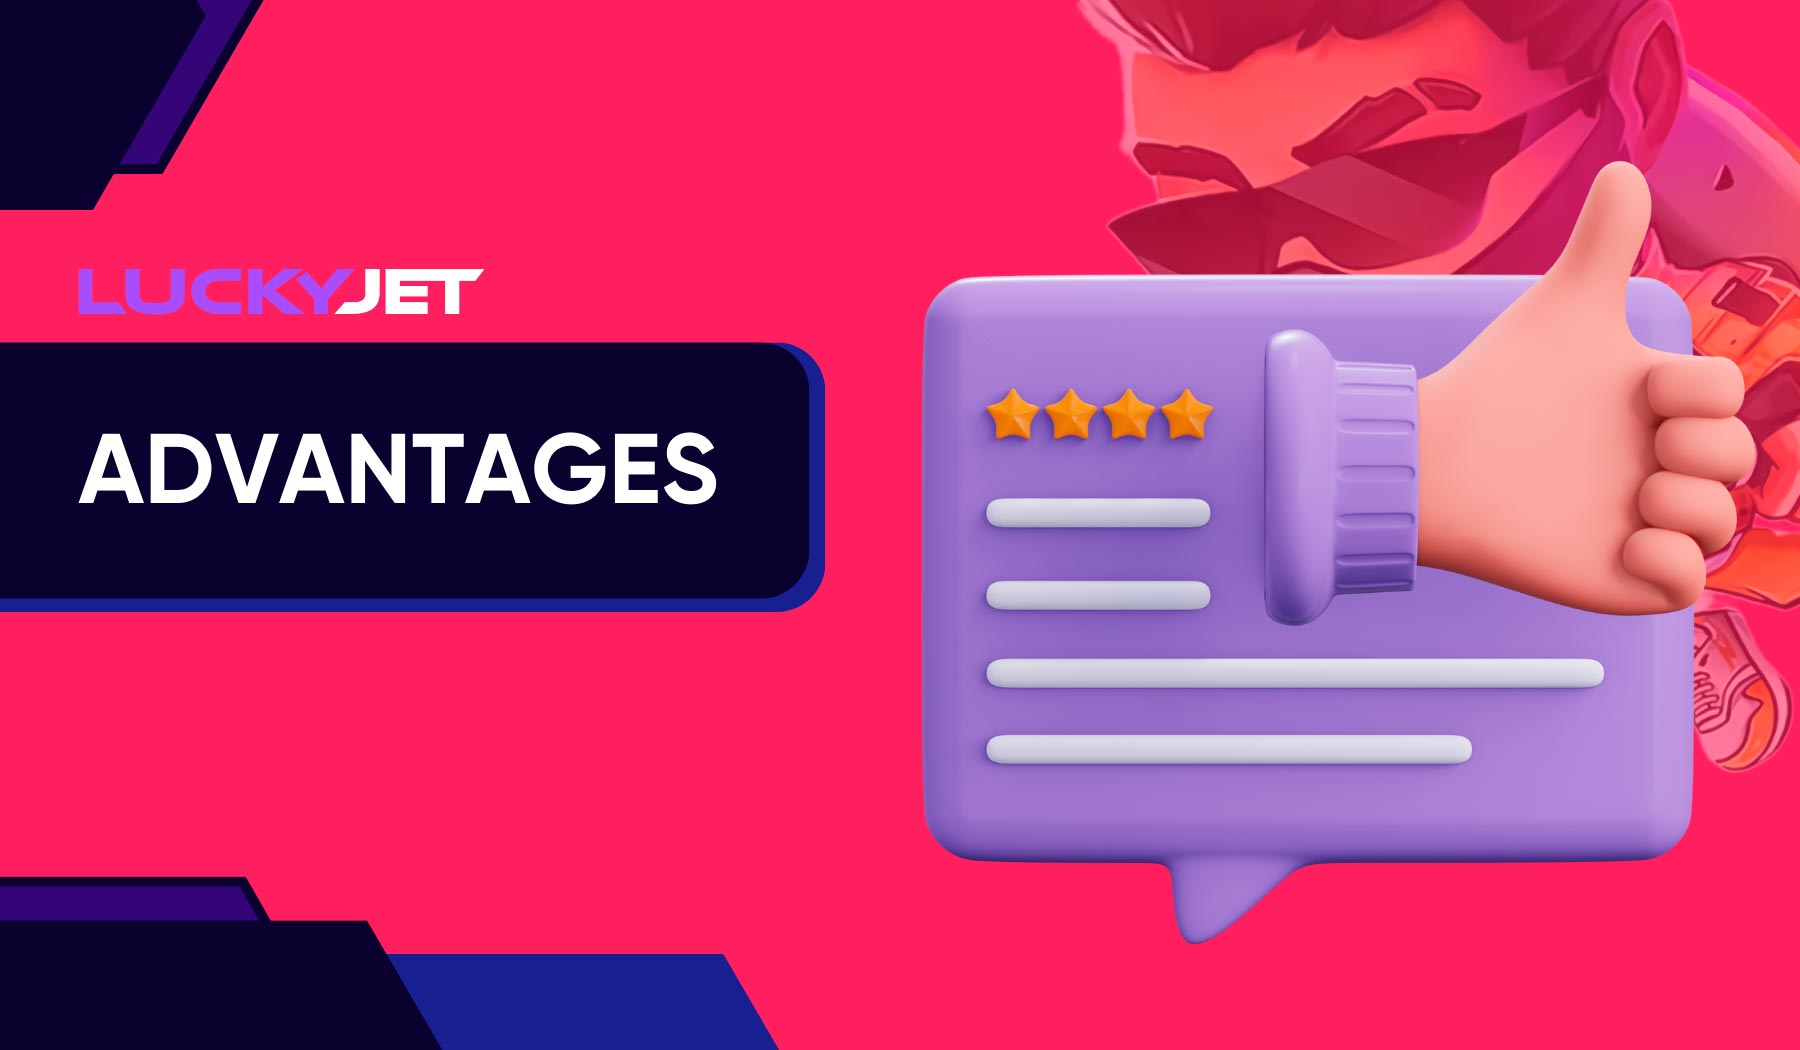 What are the Benefits of Linebet Lucky Jet